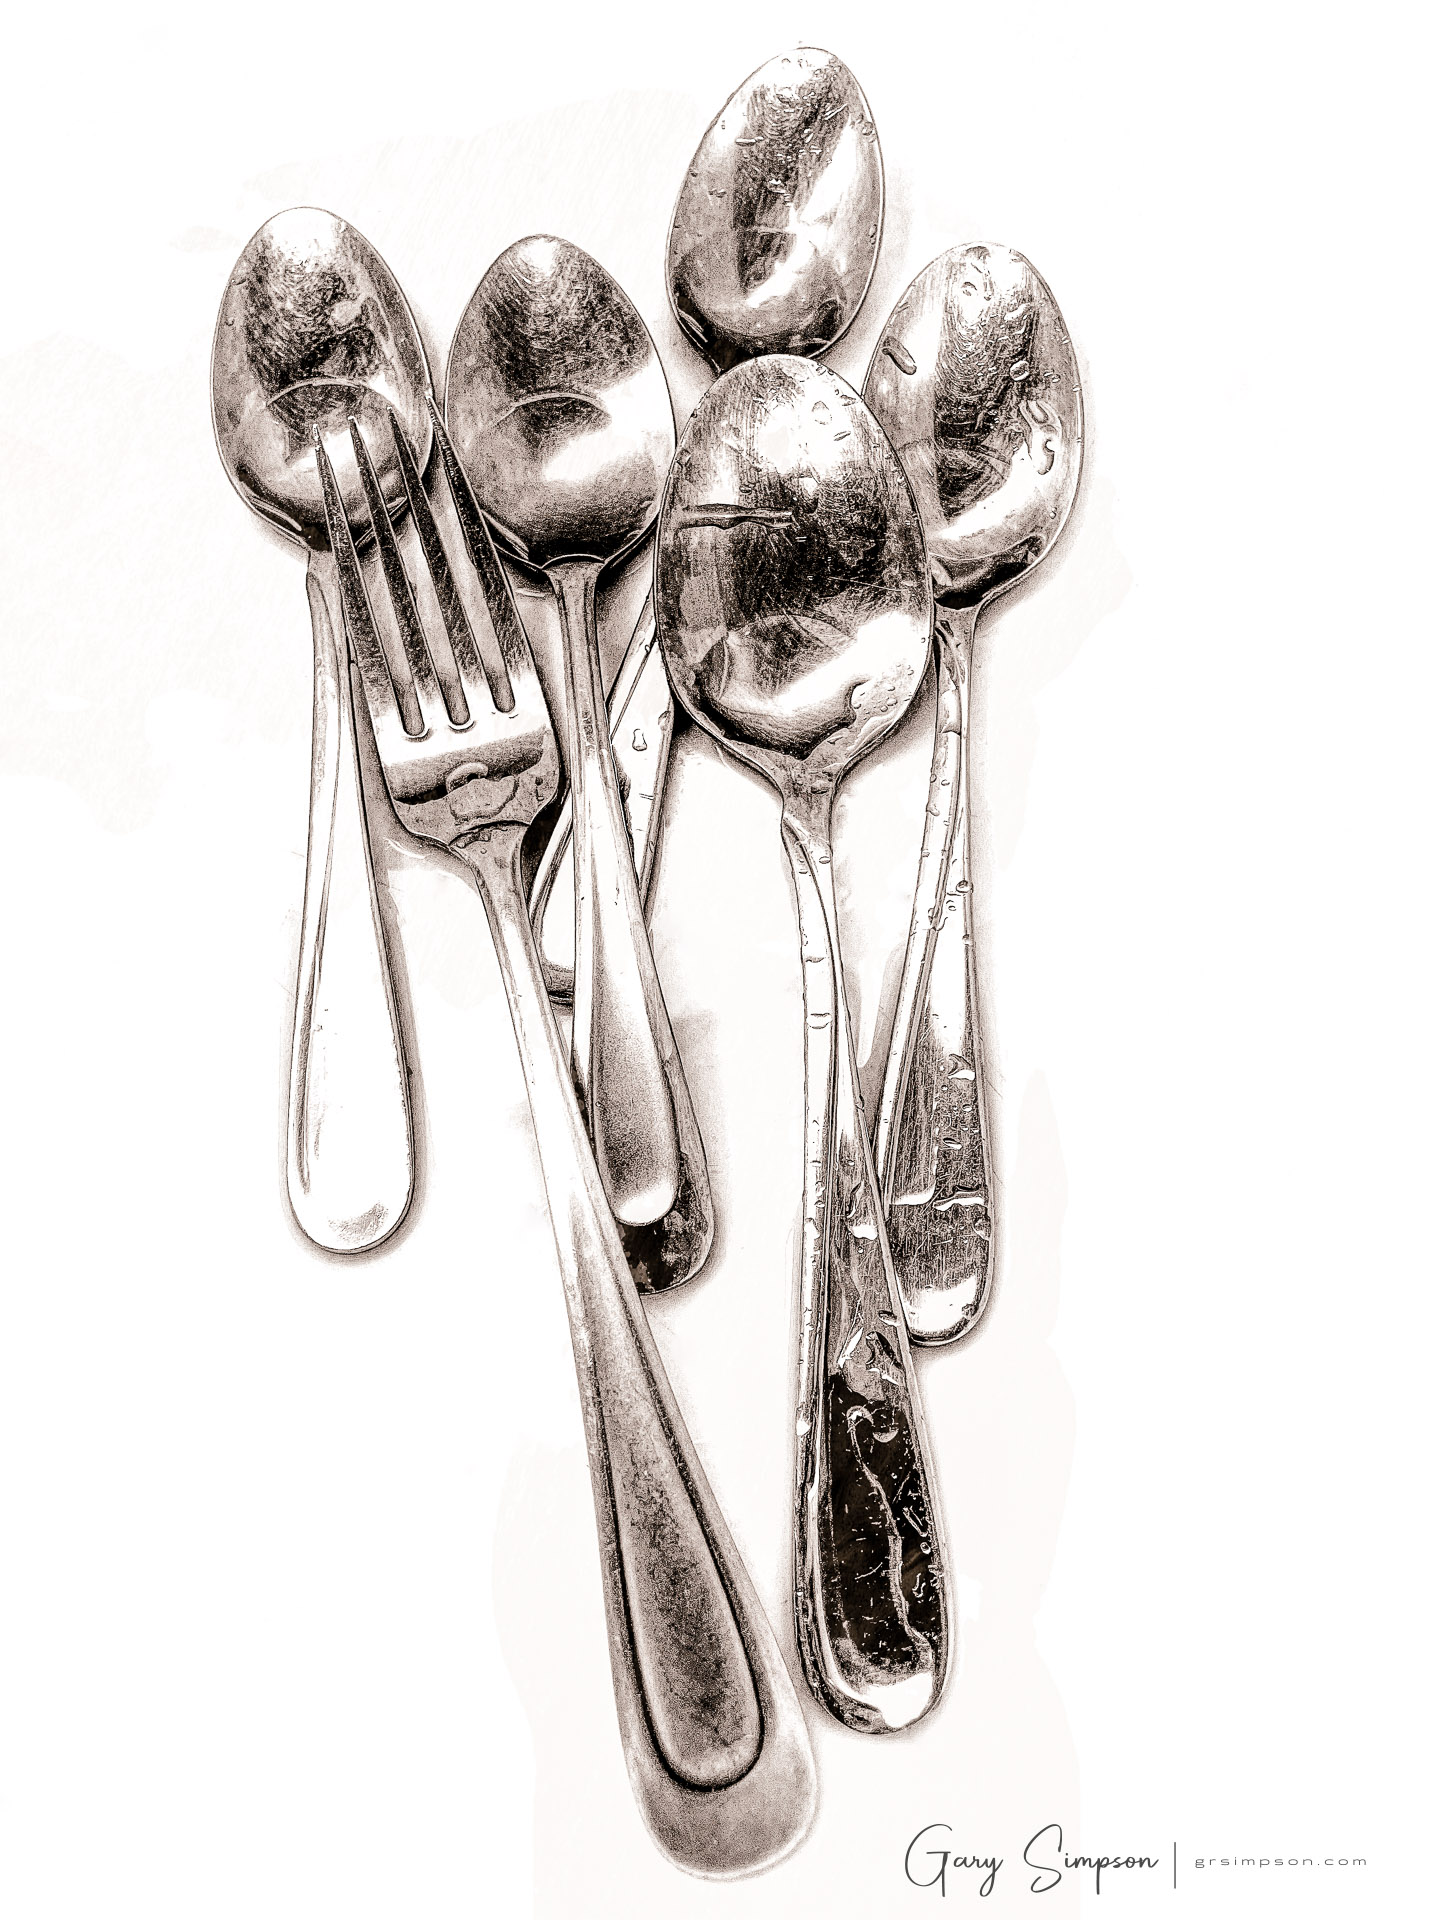 Black and white photograph of silver spoons and a fork